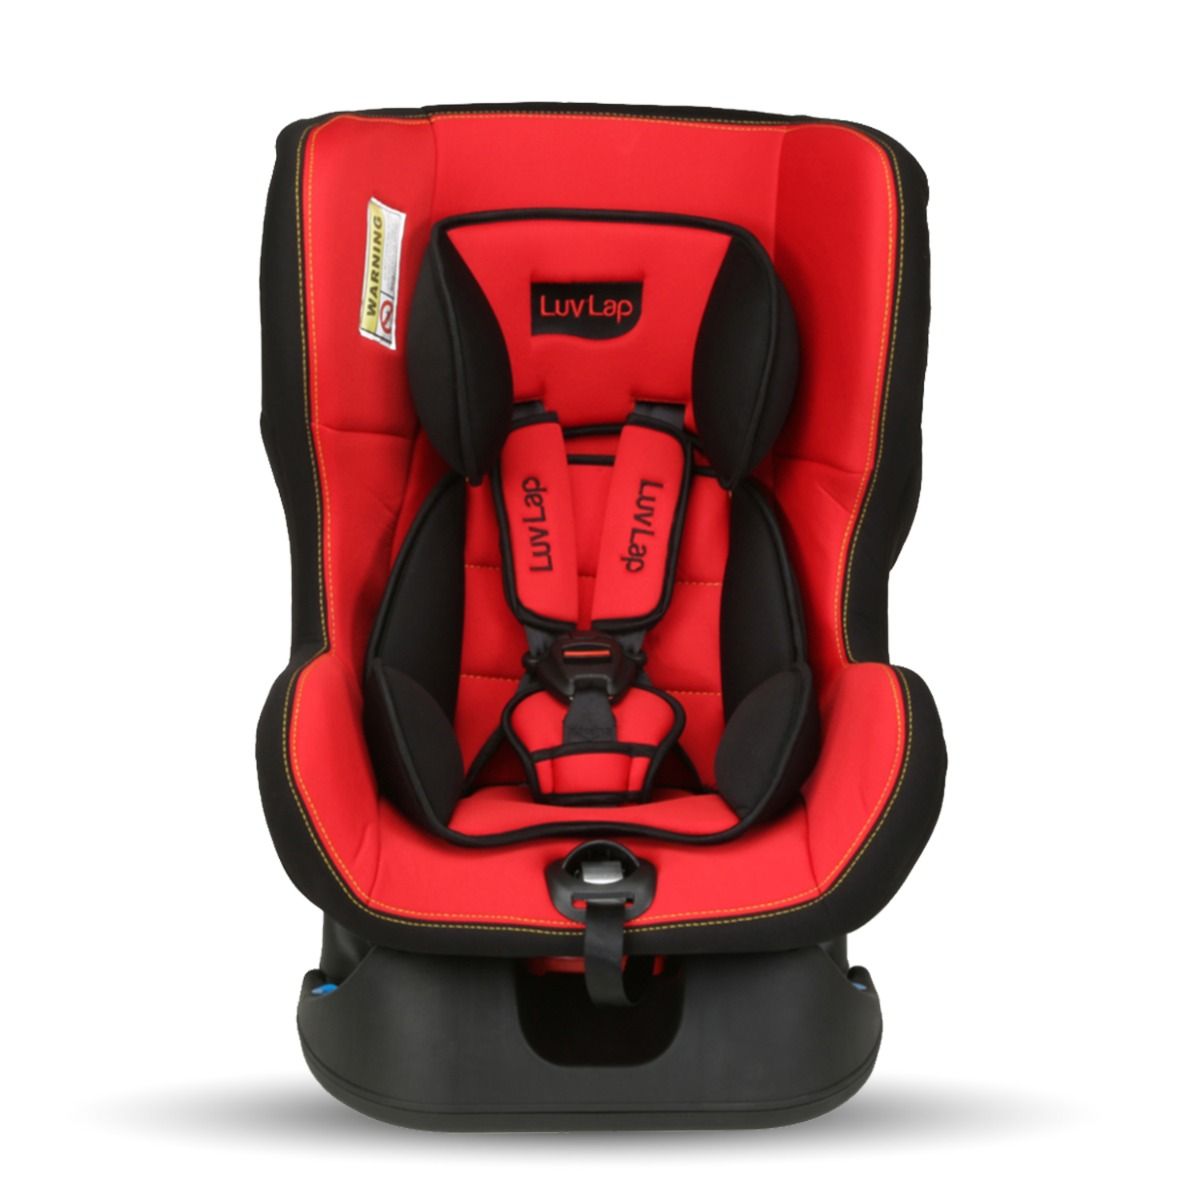 All About LuvLap Sports Car Seat for Kids